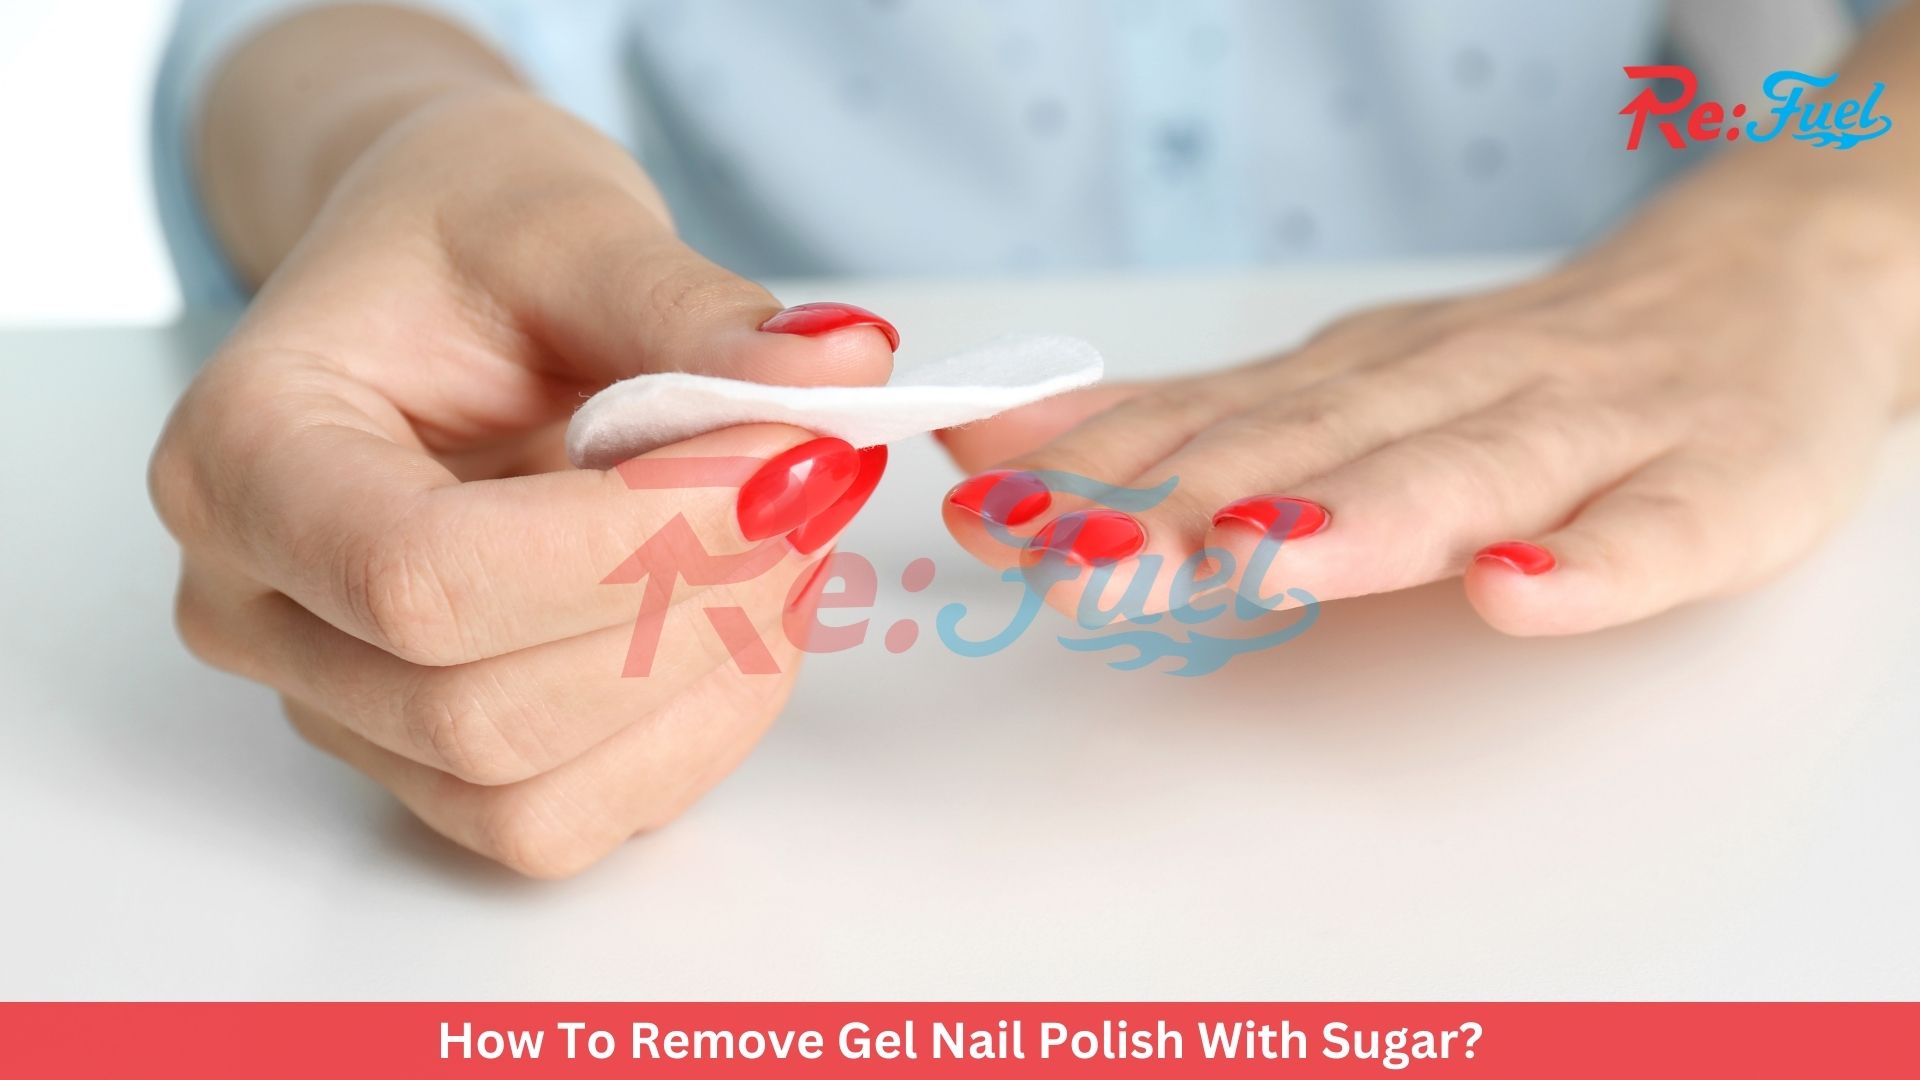 How To Remove Gel Nail Polish With Sugar?